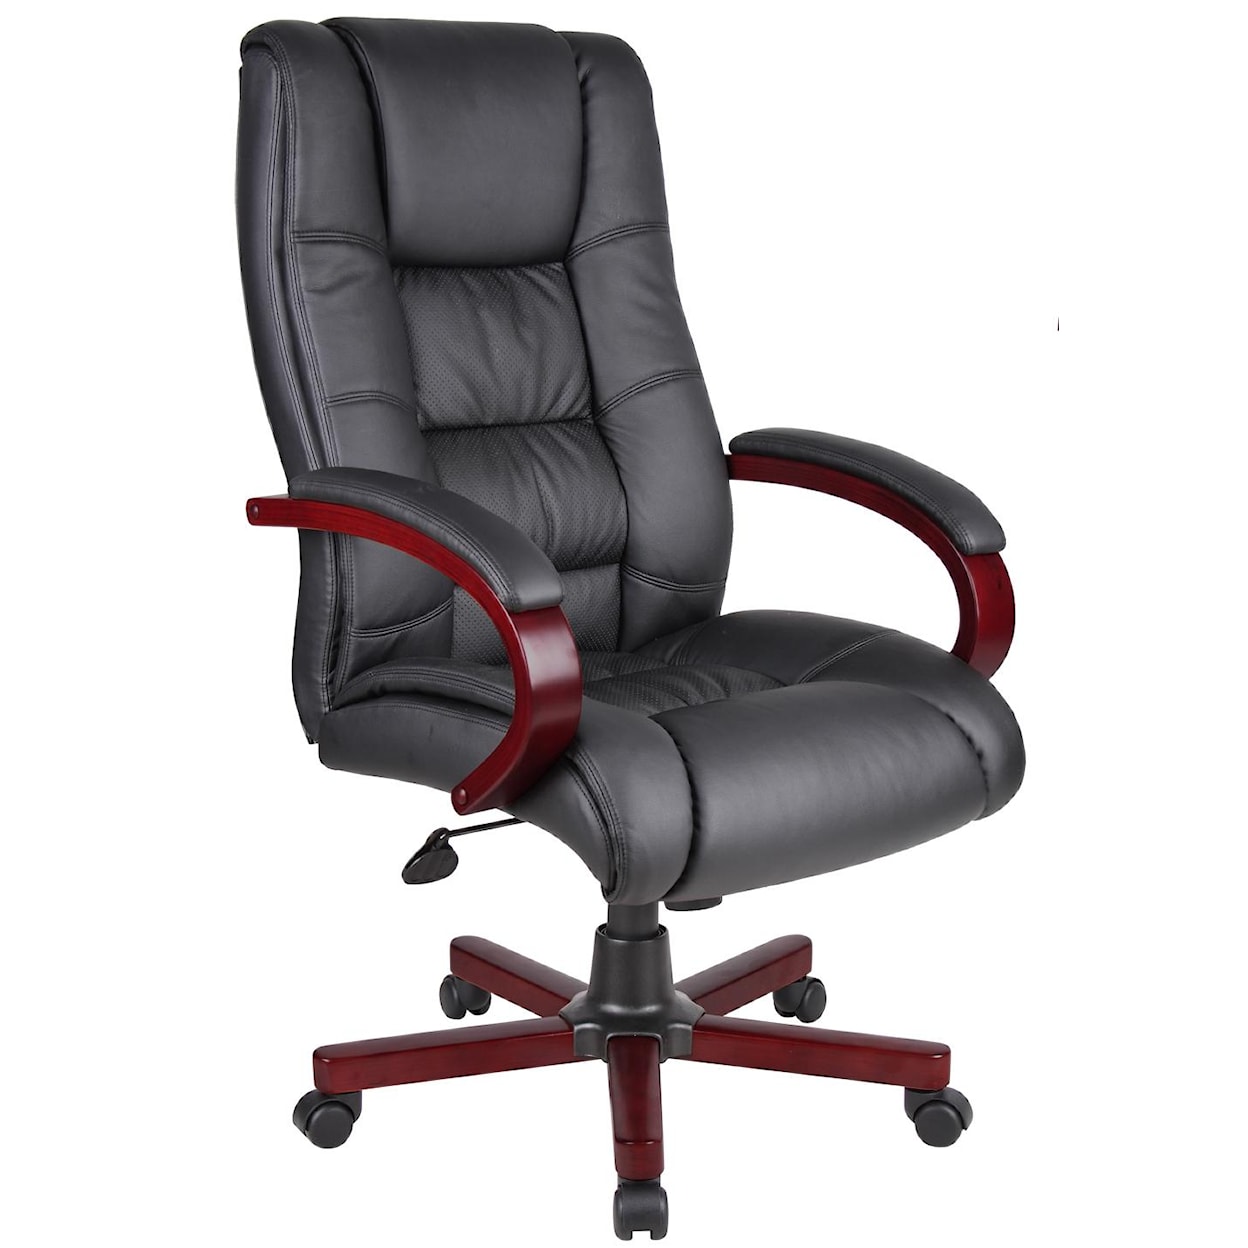 Presidential Seating Executive Chairs Upholstered Executive Chair